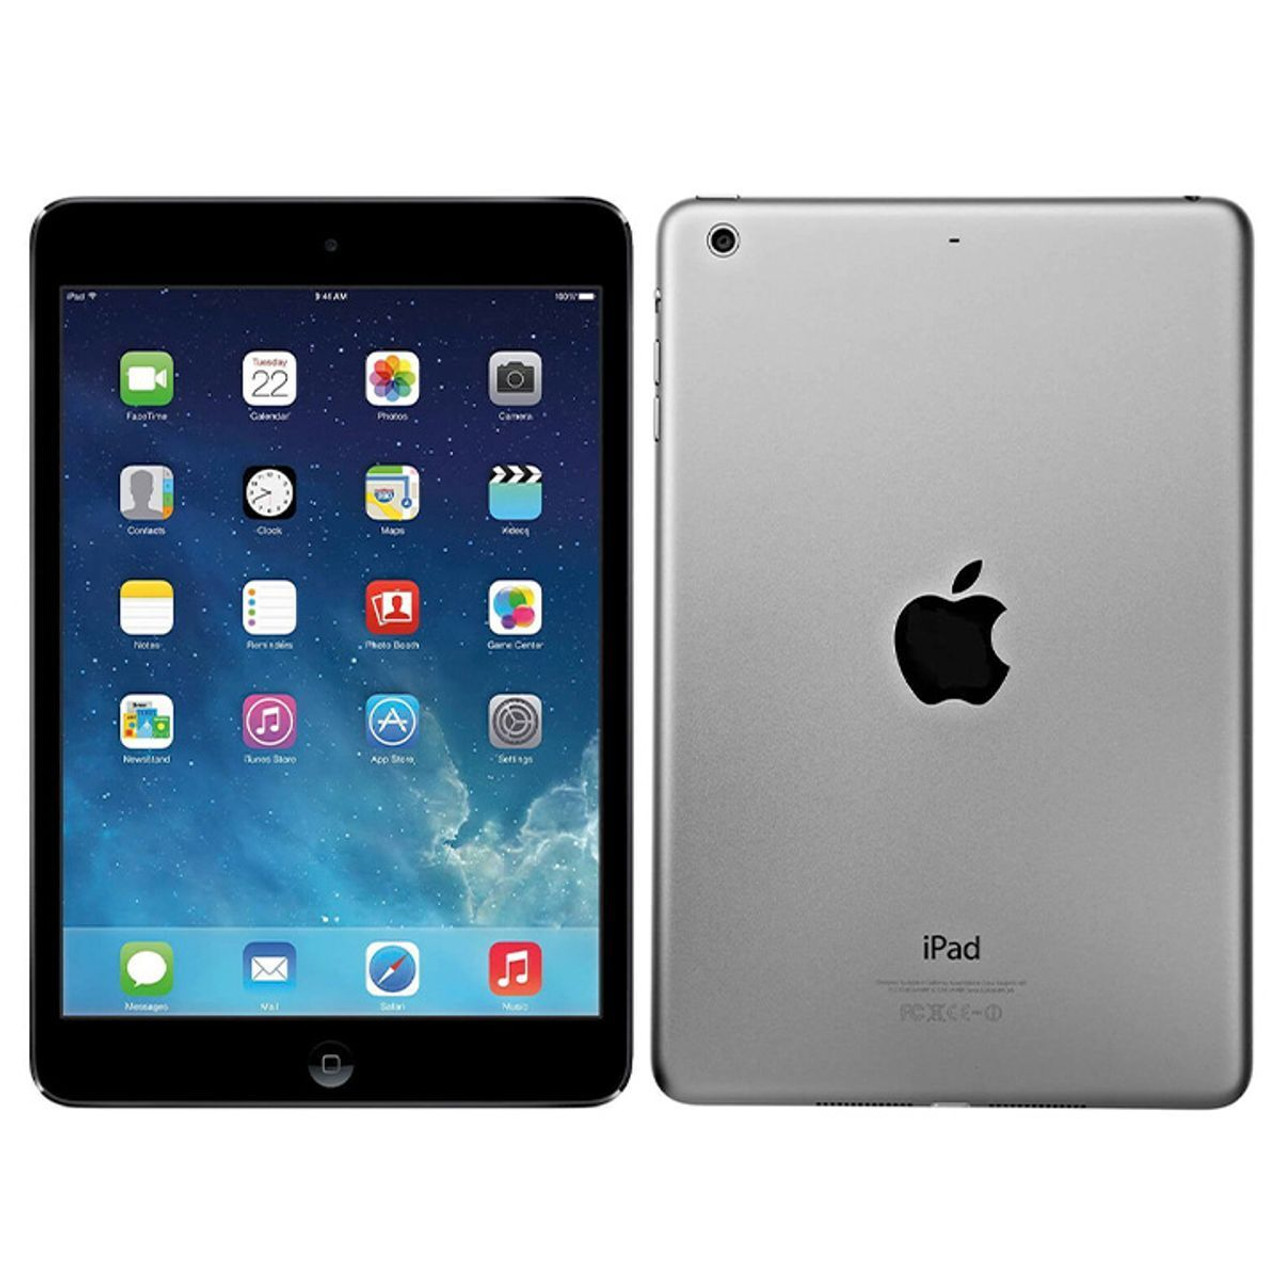 Apple® iPad Air (Wi-Fi Only) 16/32GB Bundle - Space Gray product image